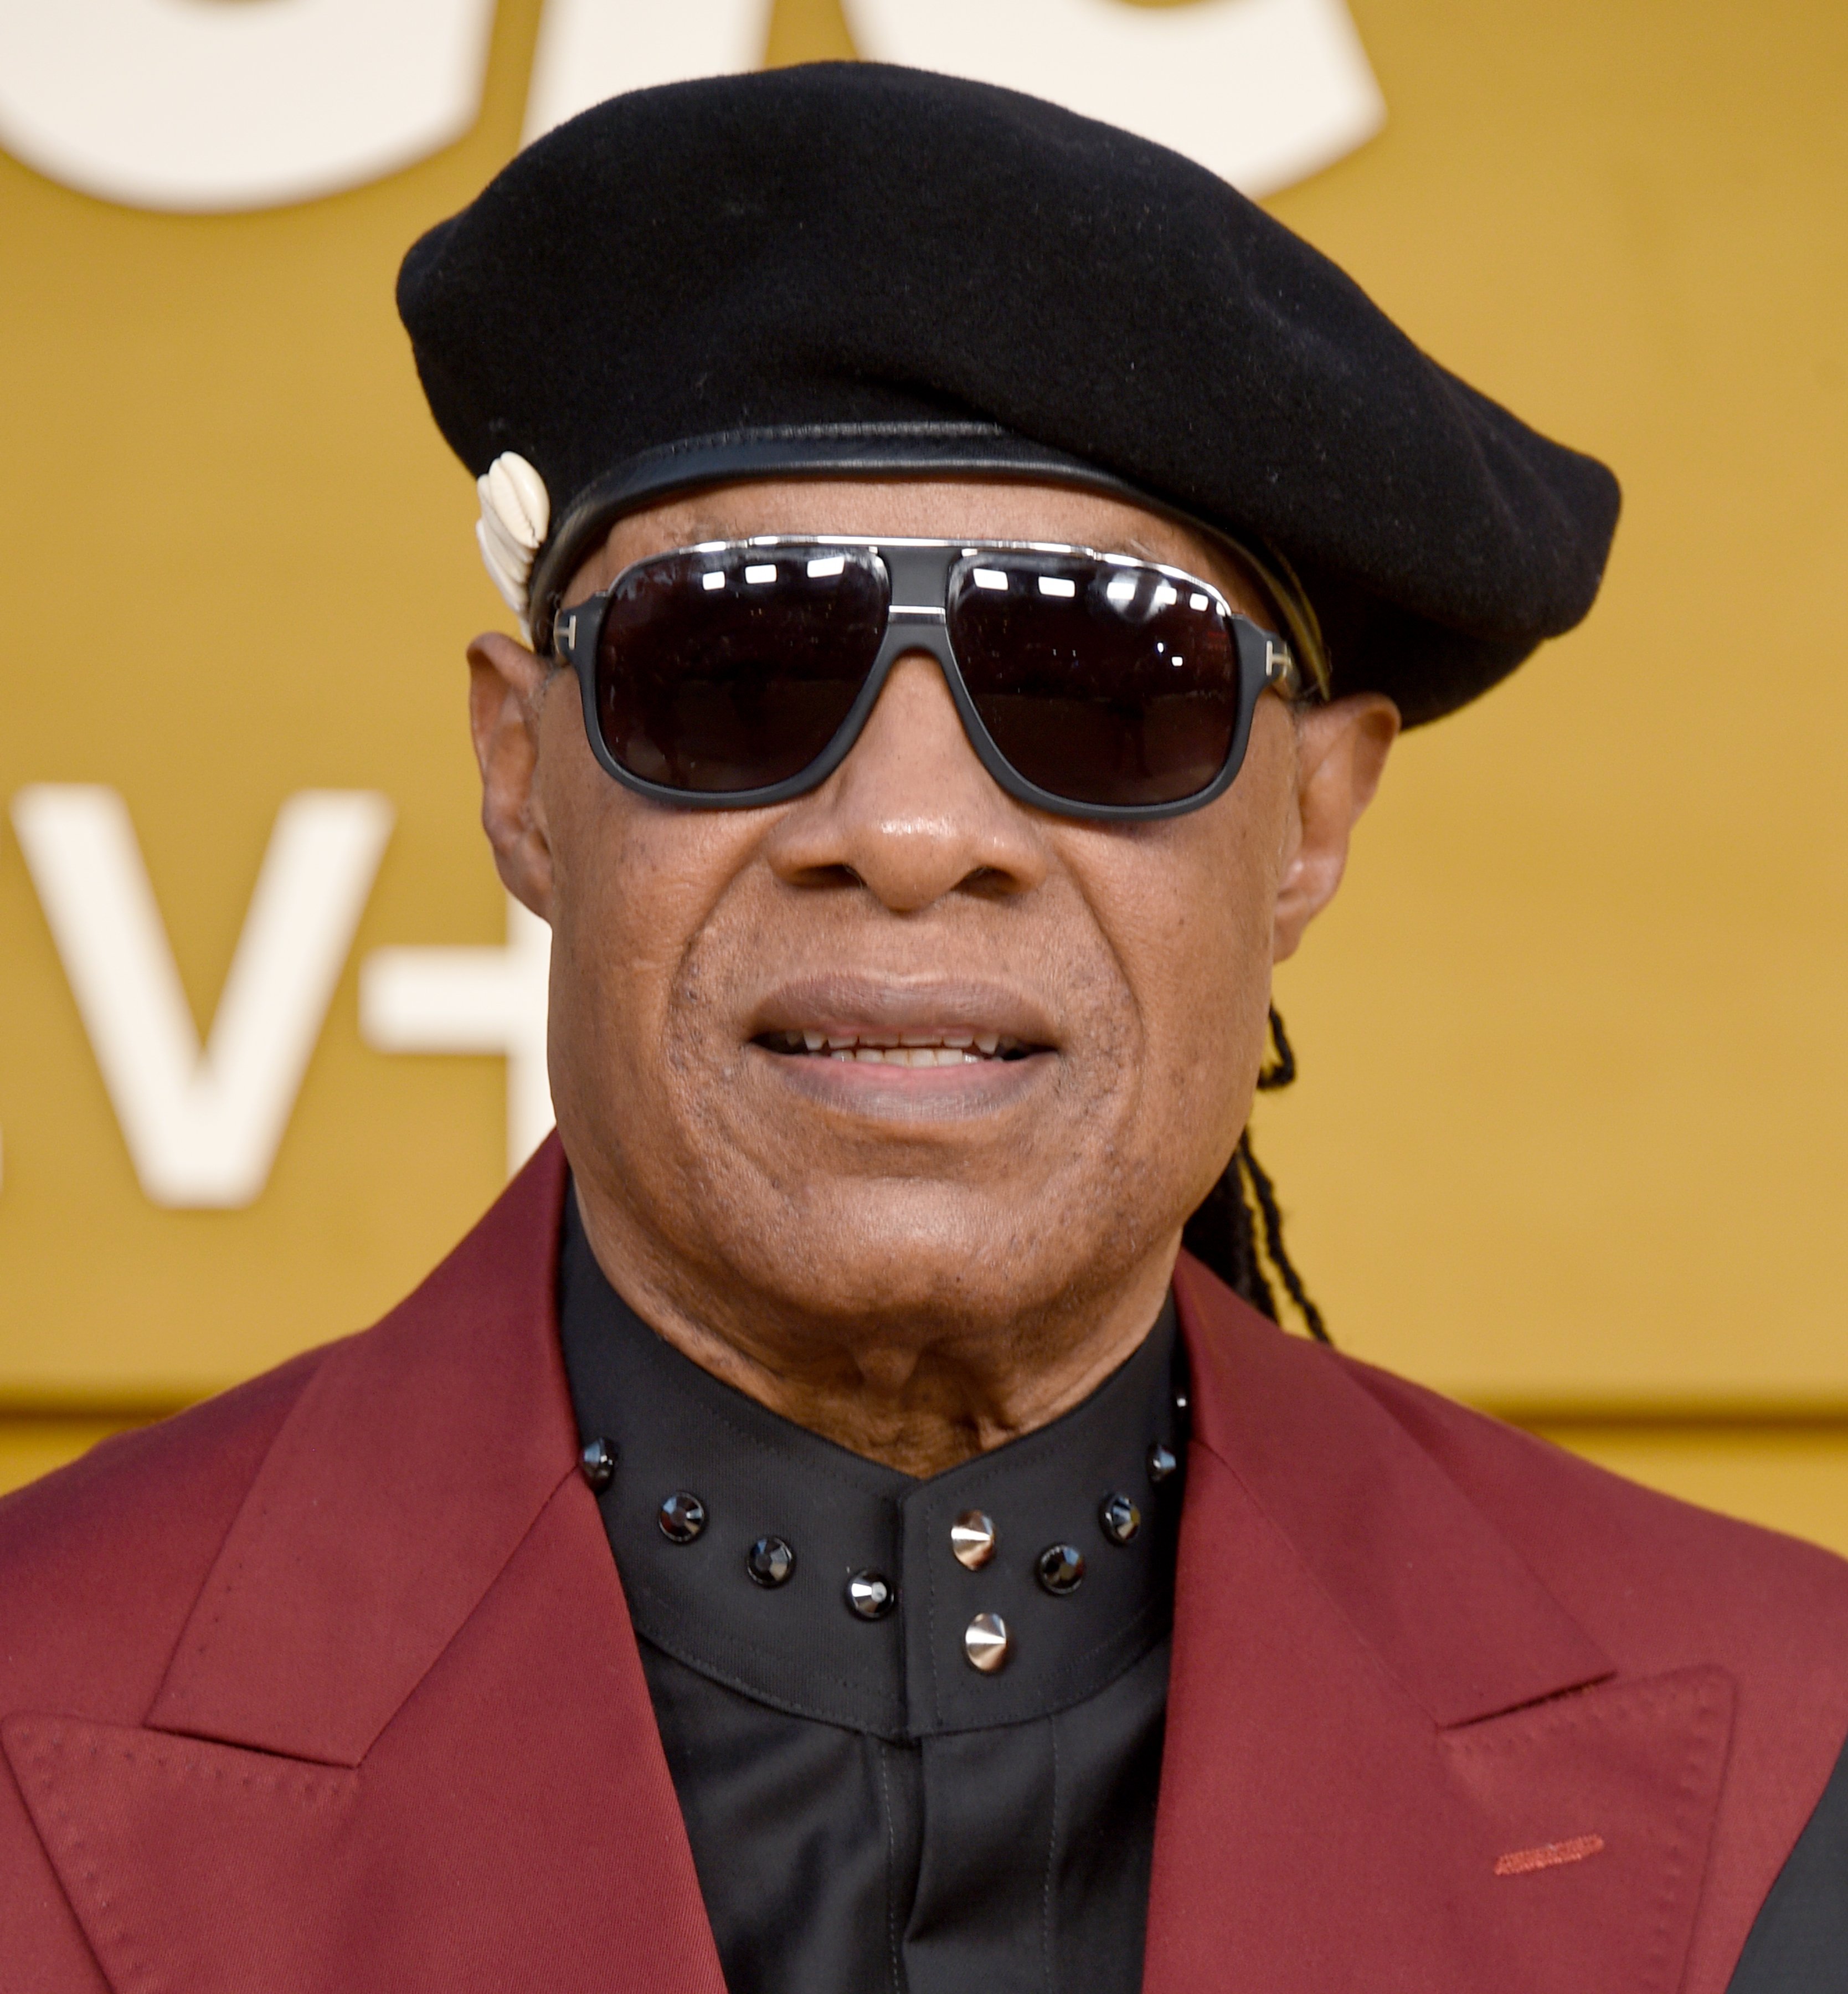 Stevie Wonder at the premiere of Apple's "They Call Me Magic" in Los Angeles on April 14, 2022 | Source: Getty Images